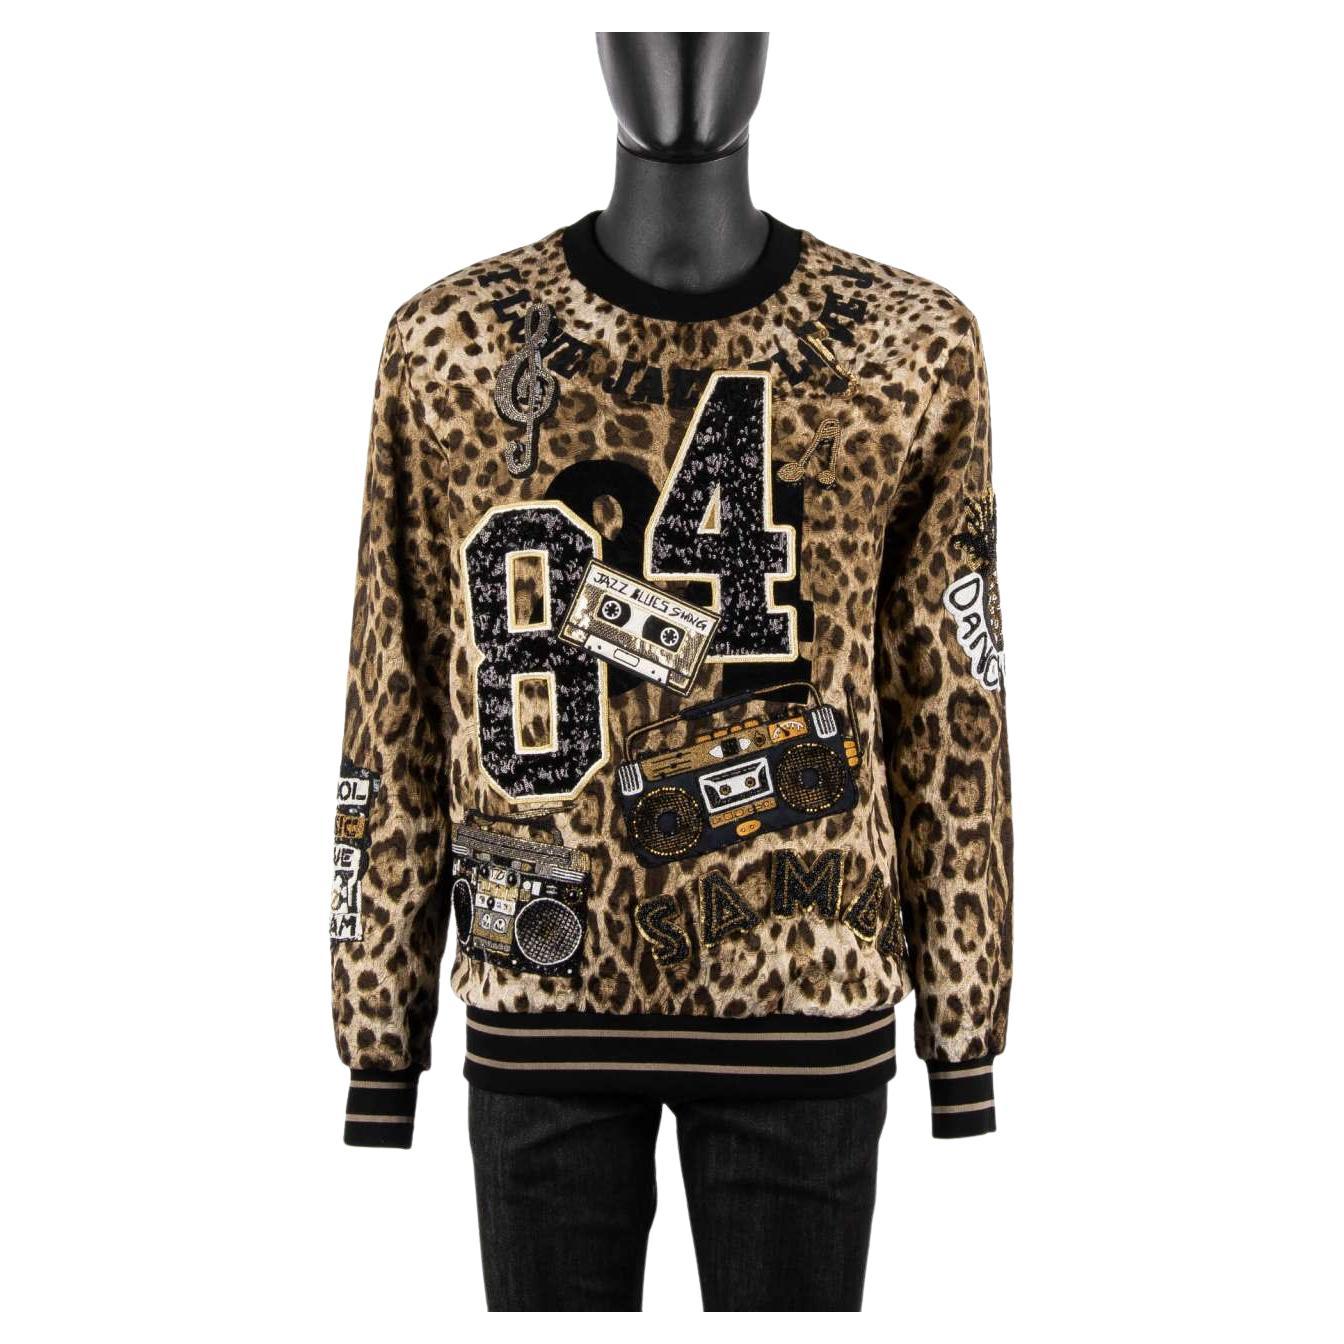 D&G Leopard Printed Sweater with Jazz Samba Music Embroidery Black Brown 54 For Sale